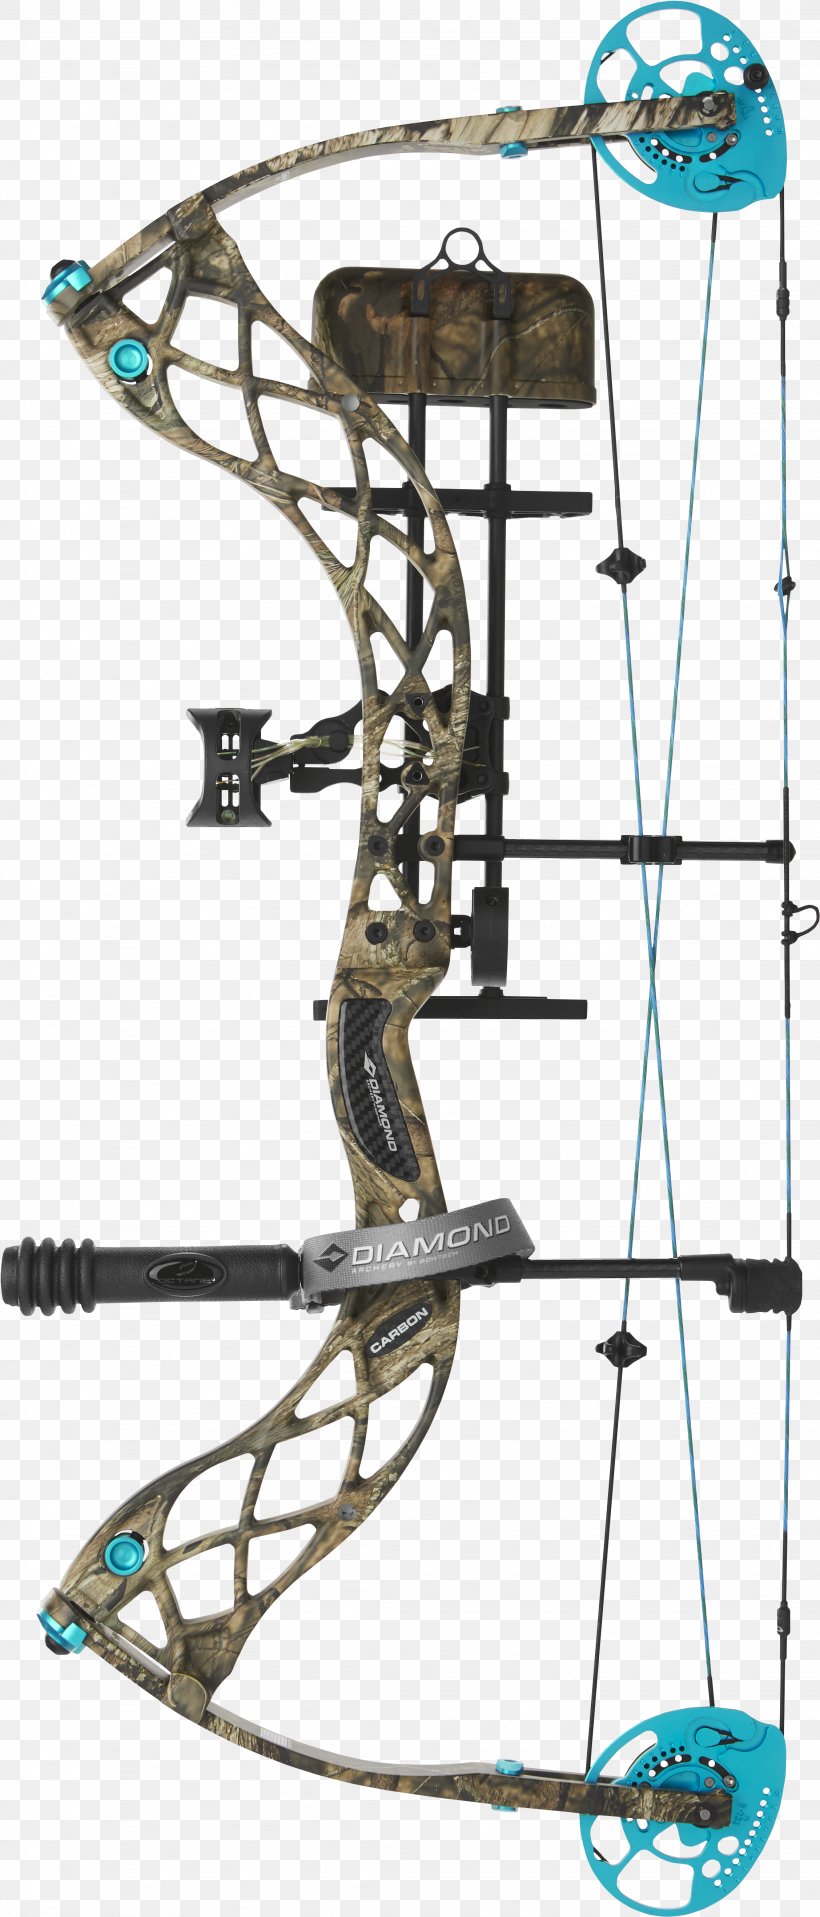 Compound Bows Archery Bow And Arrow Hunting Carbon, PNG, 2256x5275px, Compound Bows, Archery, Bow, Bow And Arrow, Bowtech Archery Download Free